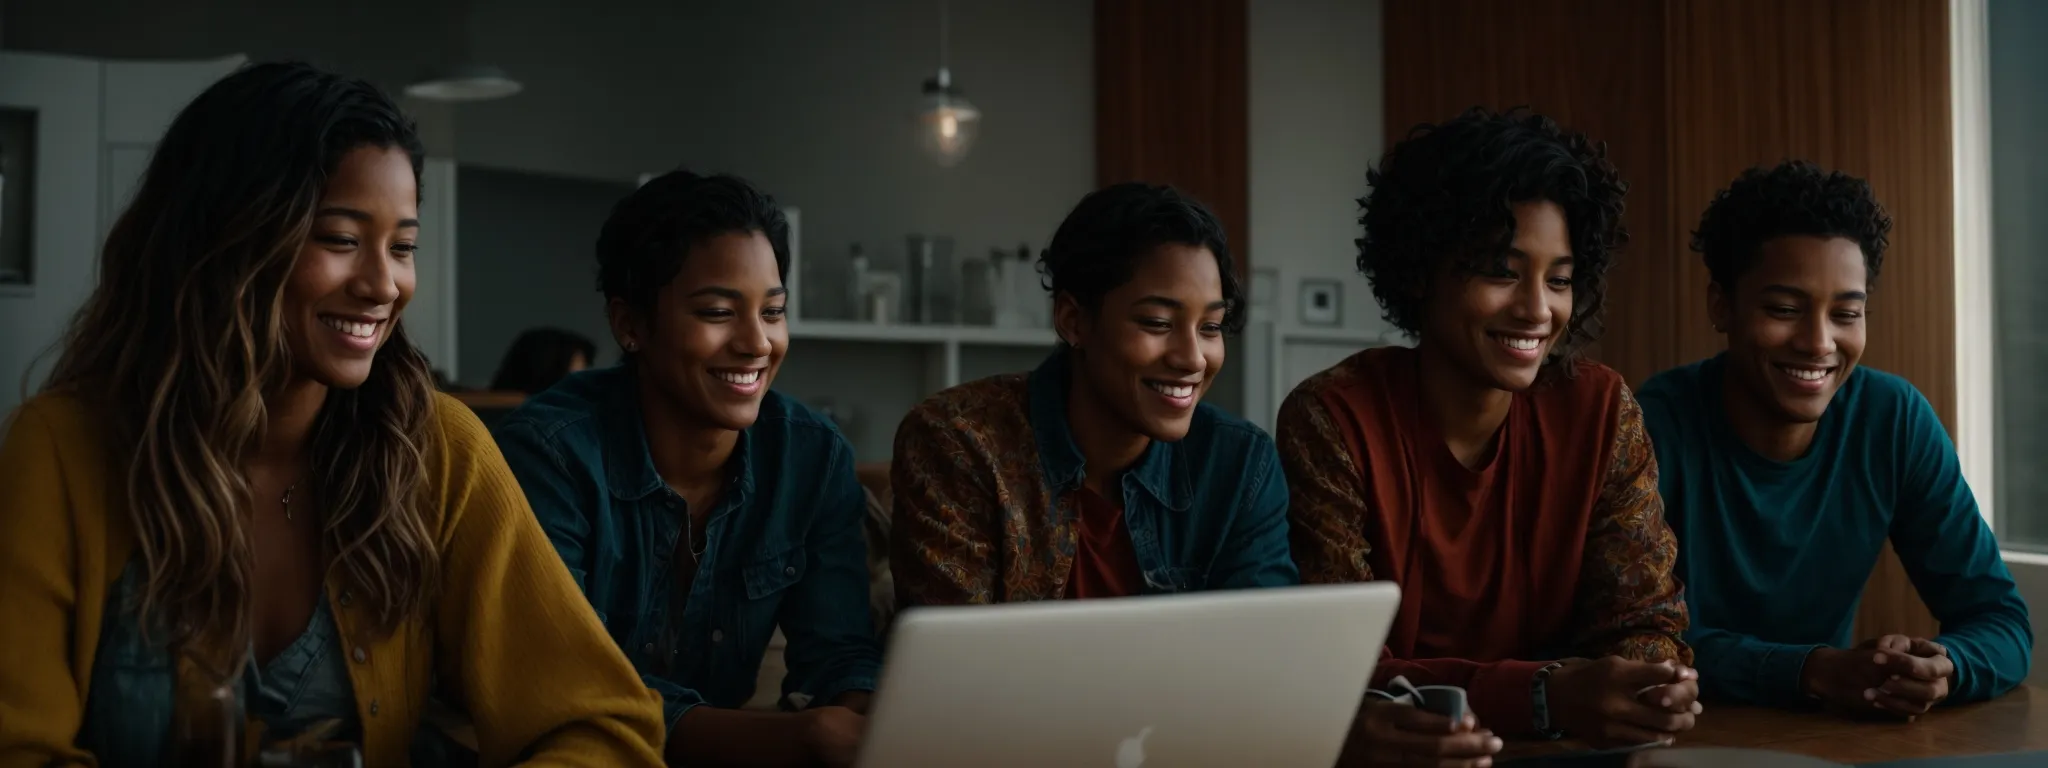 a group of smiling people sitting around a laptop, visibly satisfied as they read from a visible webpage.